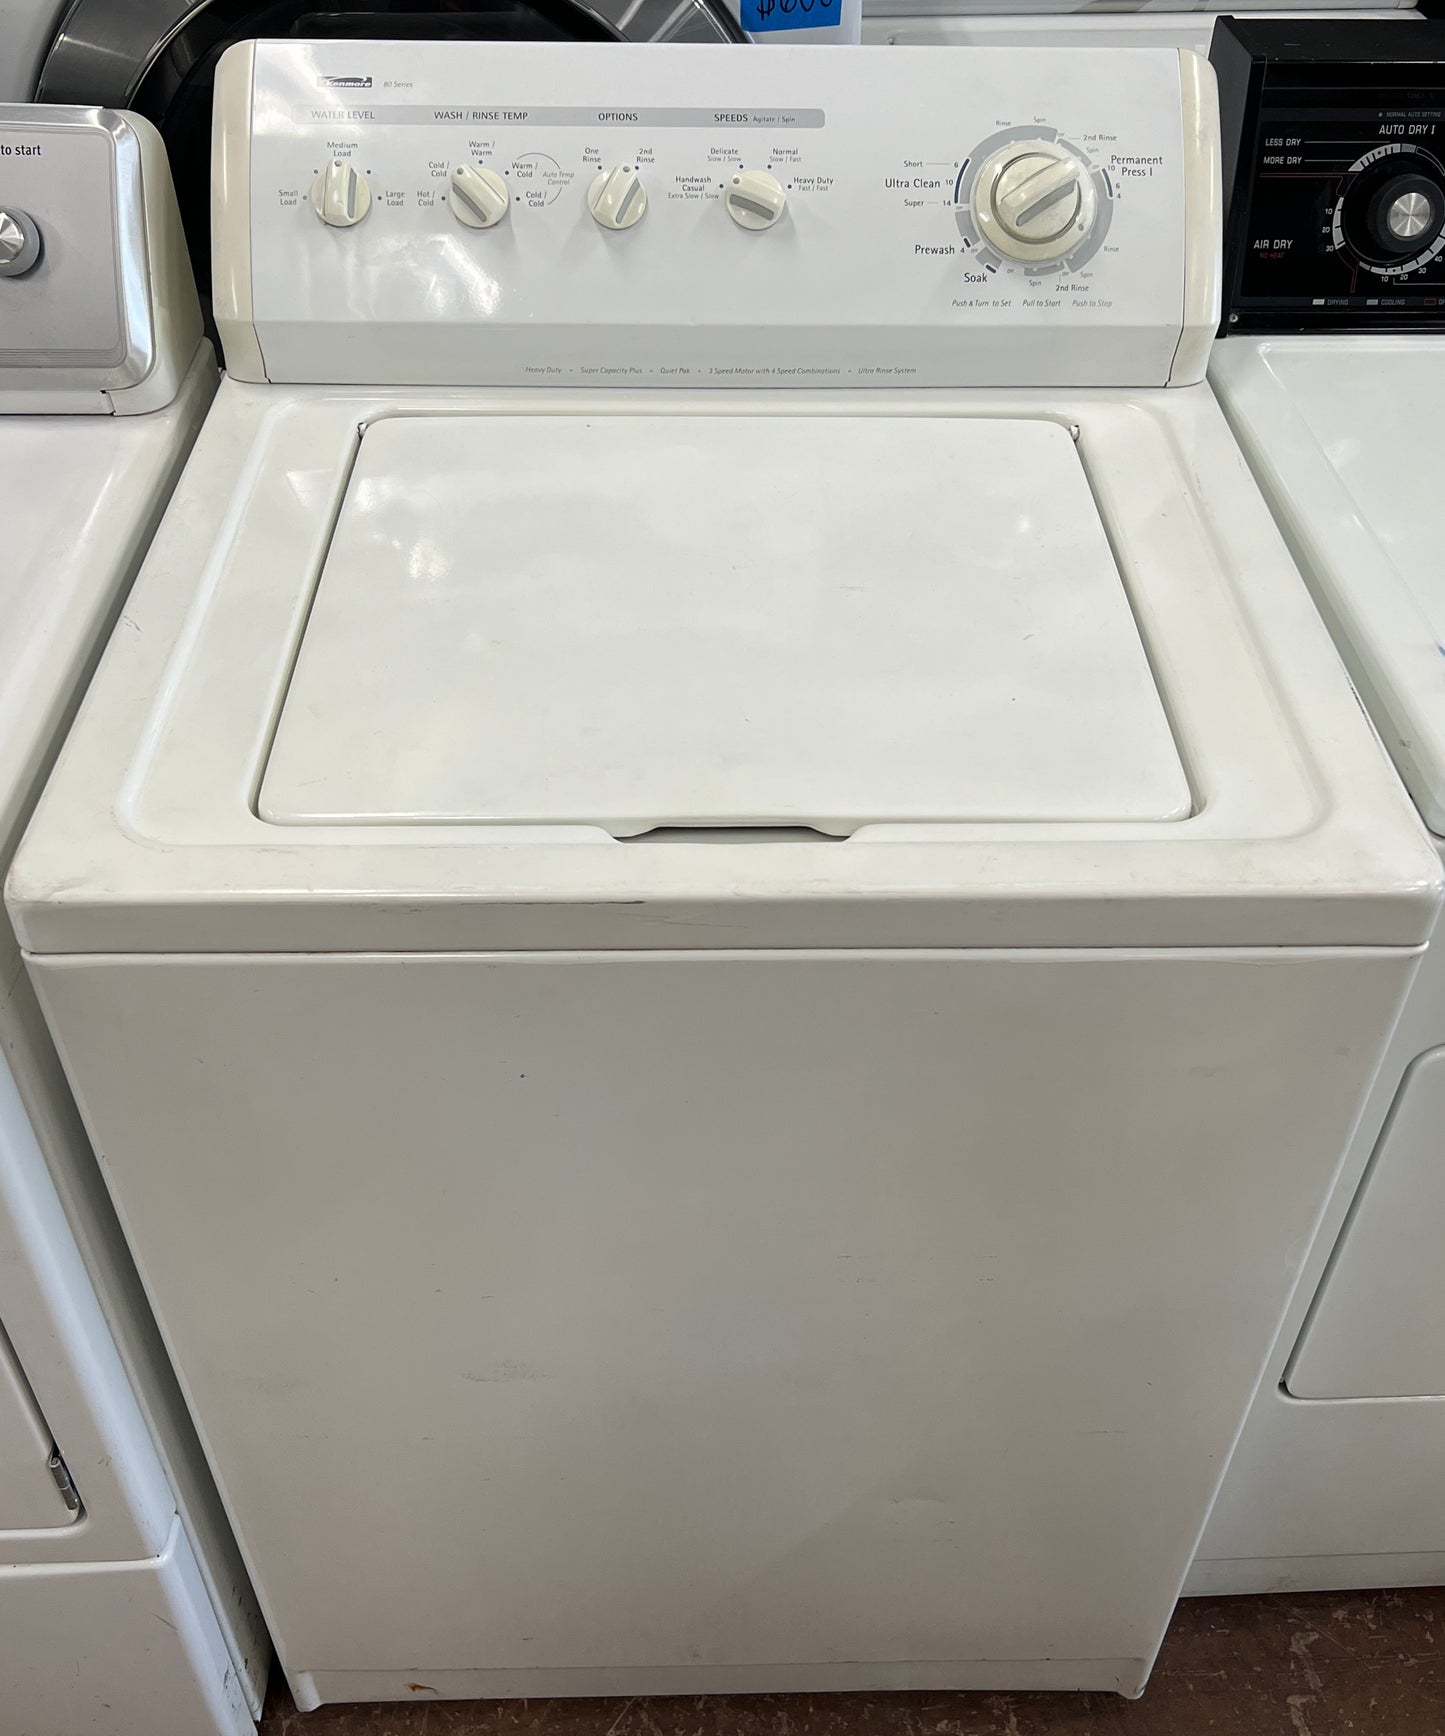 Transitional Design Online Auctions - Kenmore Washer 80 Series Model #110  72802101